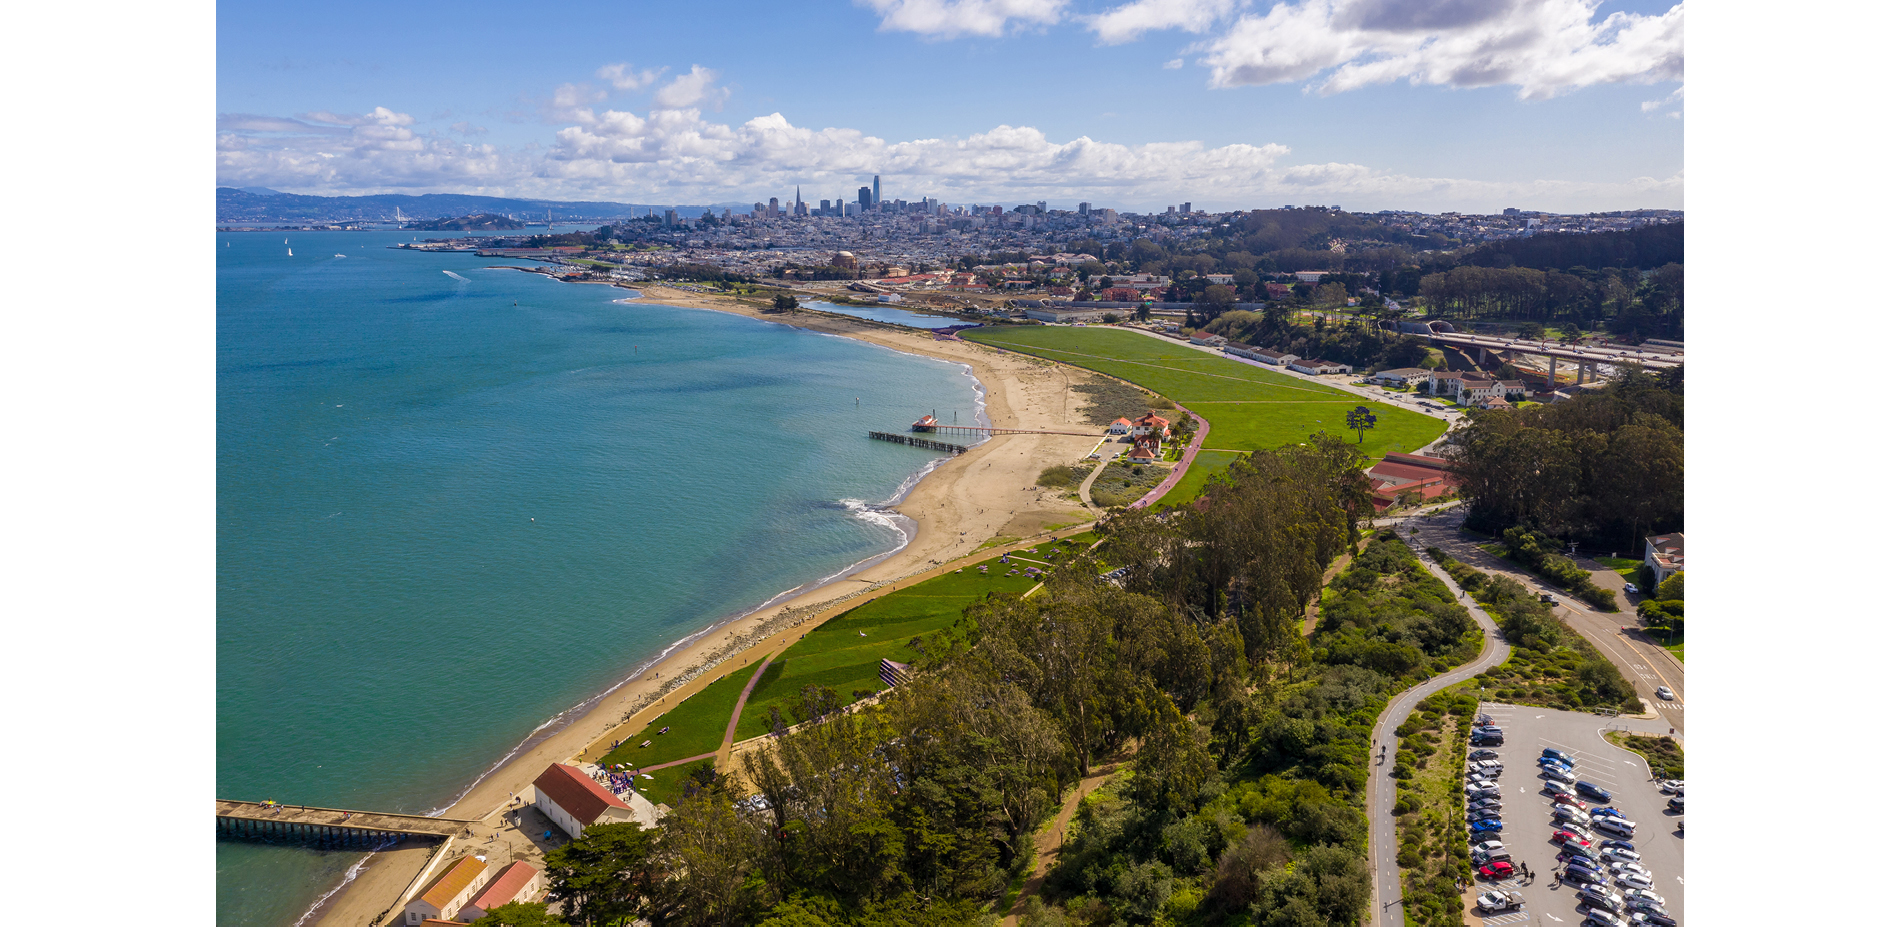 The dramatic waterfront sites between the Golden Gate Bridge and the City of San Francisco.